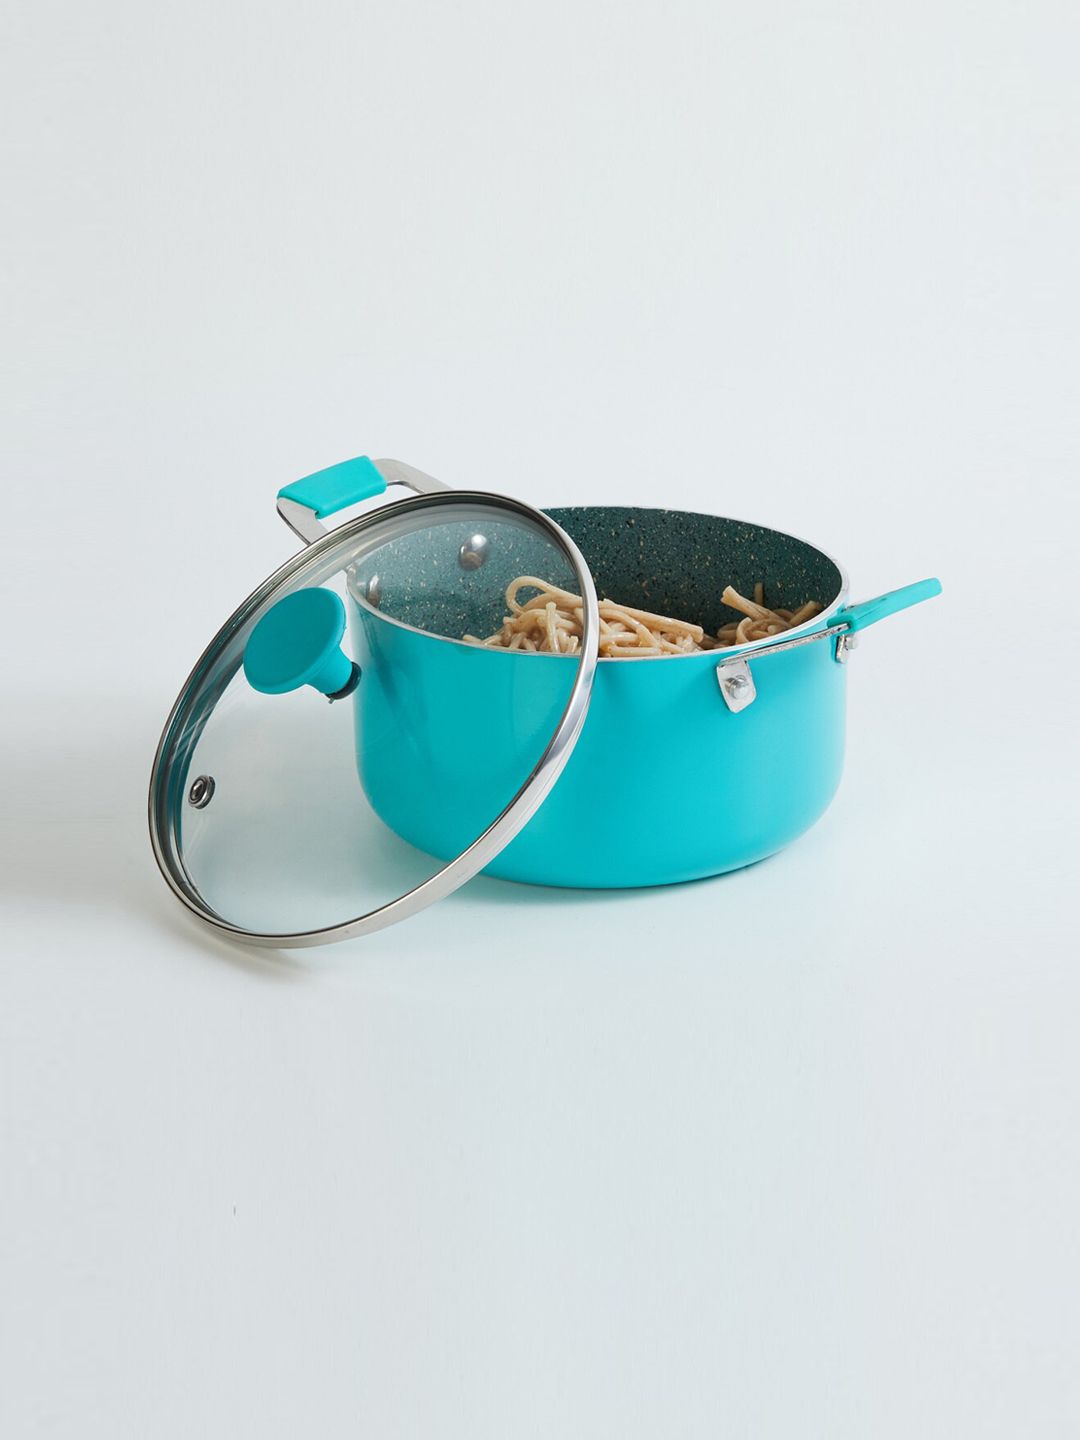 Home Centre Teal Blue Aluminium Casserole With Lid Price in India